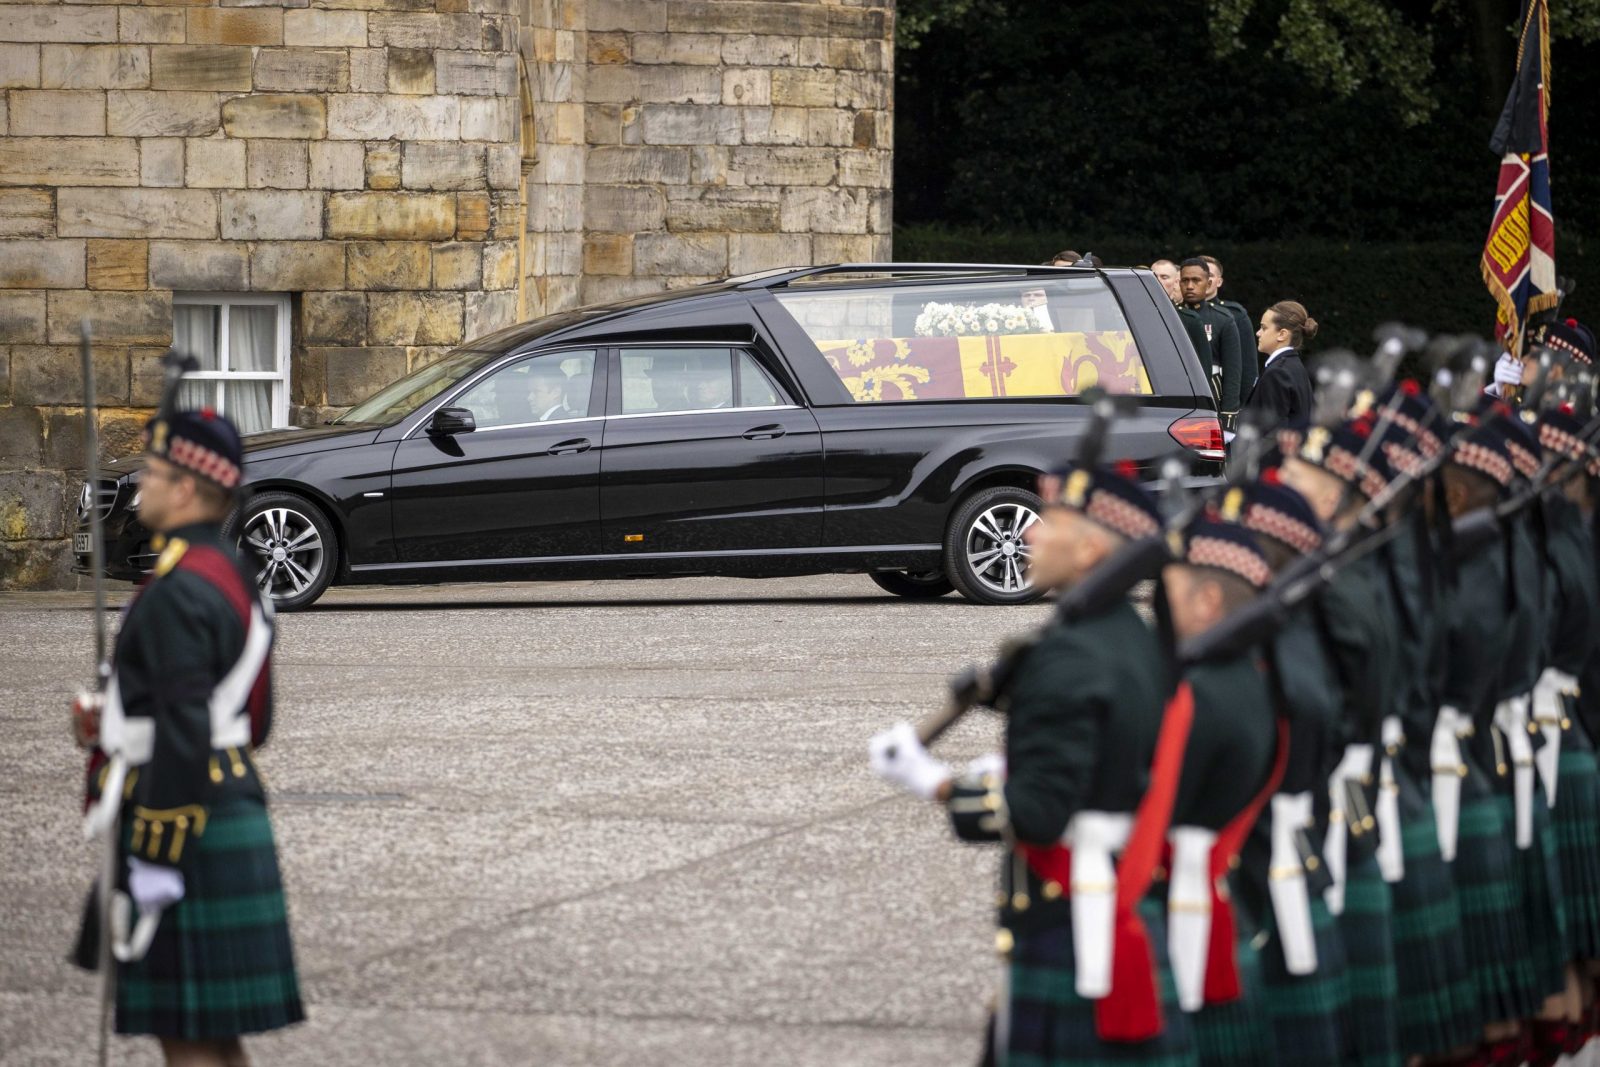 epa10178475 A handout photo made available by the British Army showing HM Queen Elizabeth II coffin, arriving at the Palace of Holyrood, in Edinburgh, Scotland, Britain, 11 September 2022. The arrival of the hearse carrying Queen Elizabeth II marks the first stage of the journey from Balmoral to London. It will remain in Holyroodhouse overnight. Britain's Queen Elizabeth II died at her Scottish estate on 08 September 2022.  EPA/Corporal Nathan GM Tanuku, RLC / British Army / HADNOUT  HANDOUT EDITORIAL USE ONLY/NO SALES